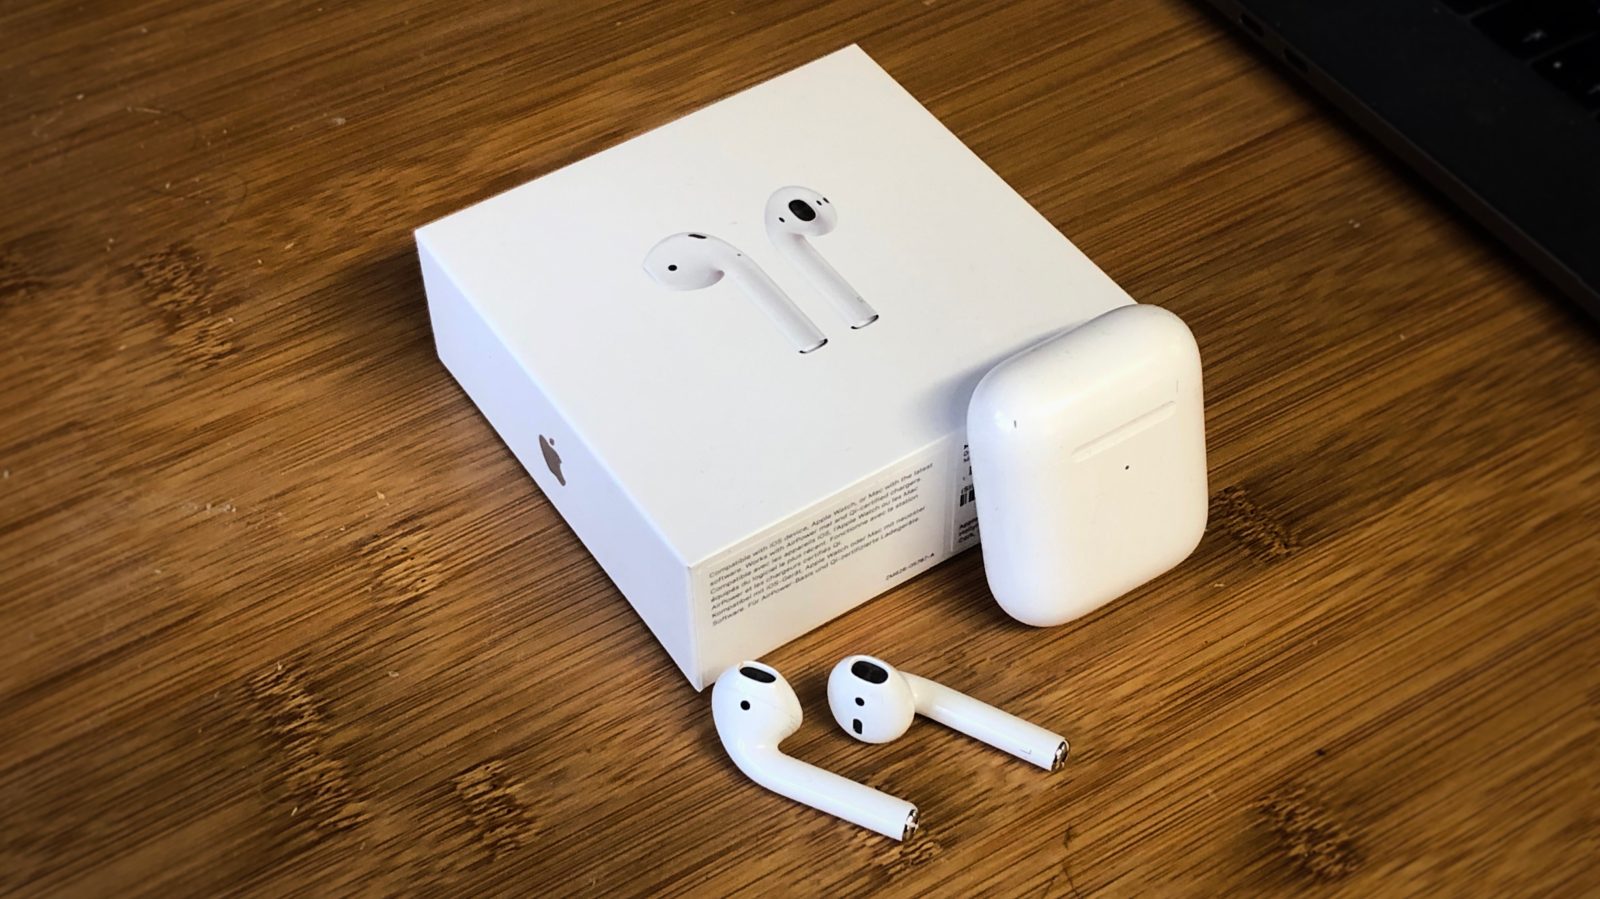 Apple AirPods see first price drop, deals on MacBook Pro, more - 9to5Mac